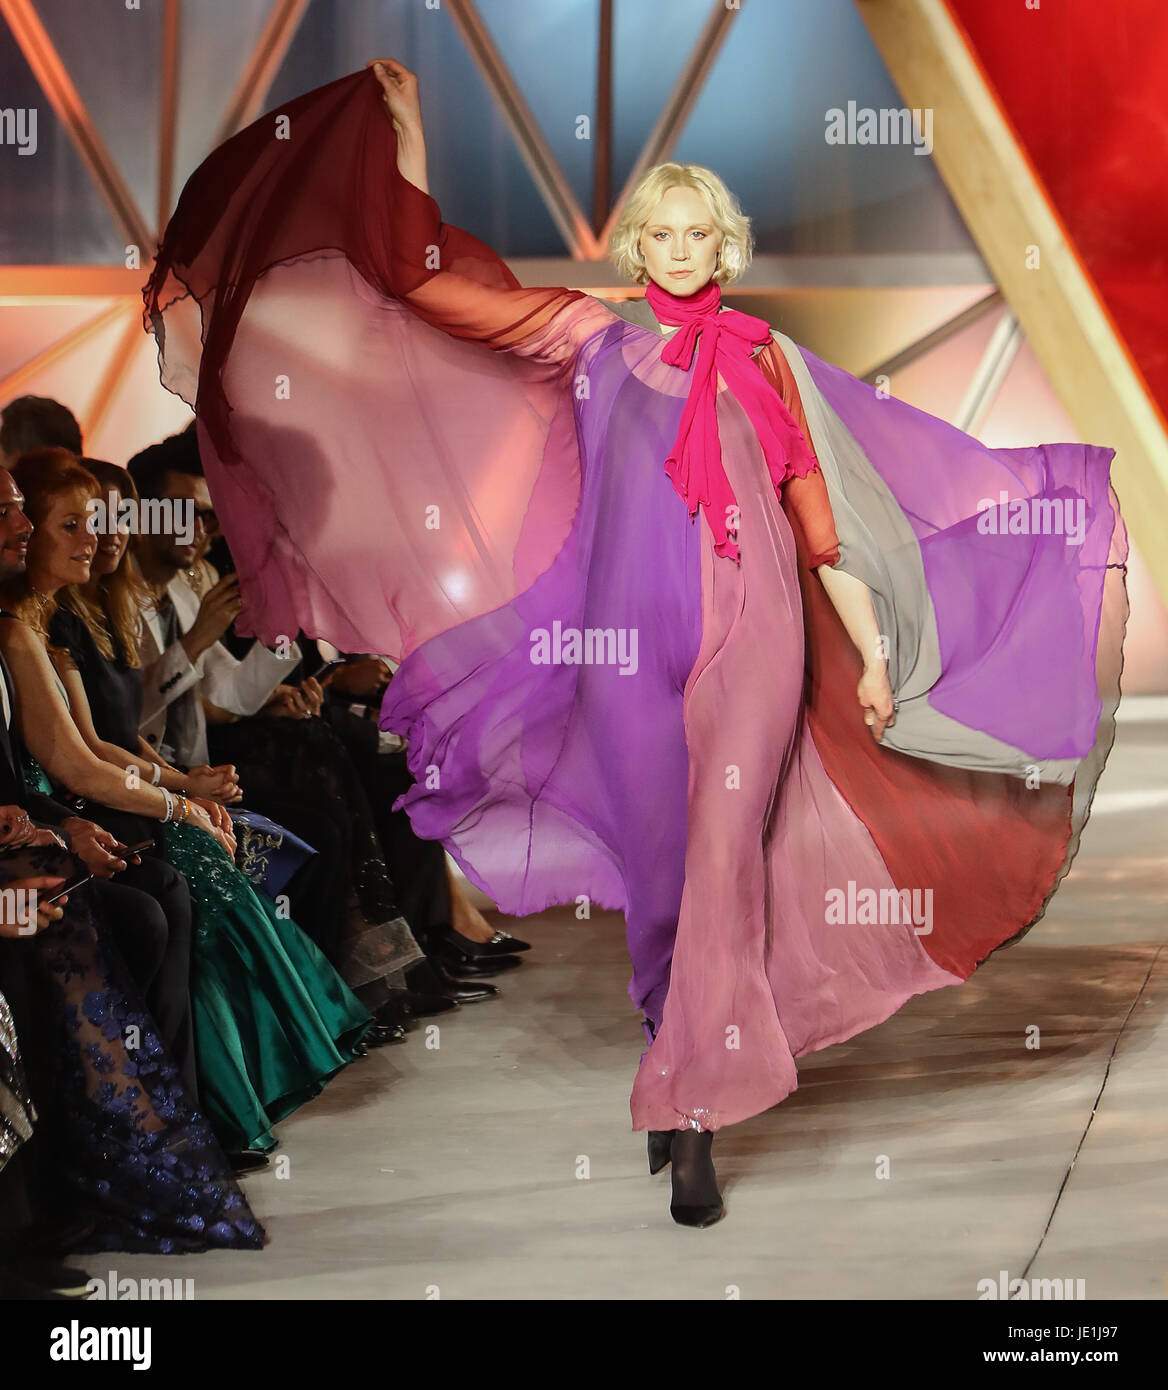 Gwendoline Christie on the catwalk at the for Relief event during the 70th annual Film Festival, at Aeroport Cannes Mandelieu in Cannes, France. Featuring: Gwendoline Christie Where: Cannes, France When: